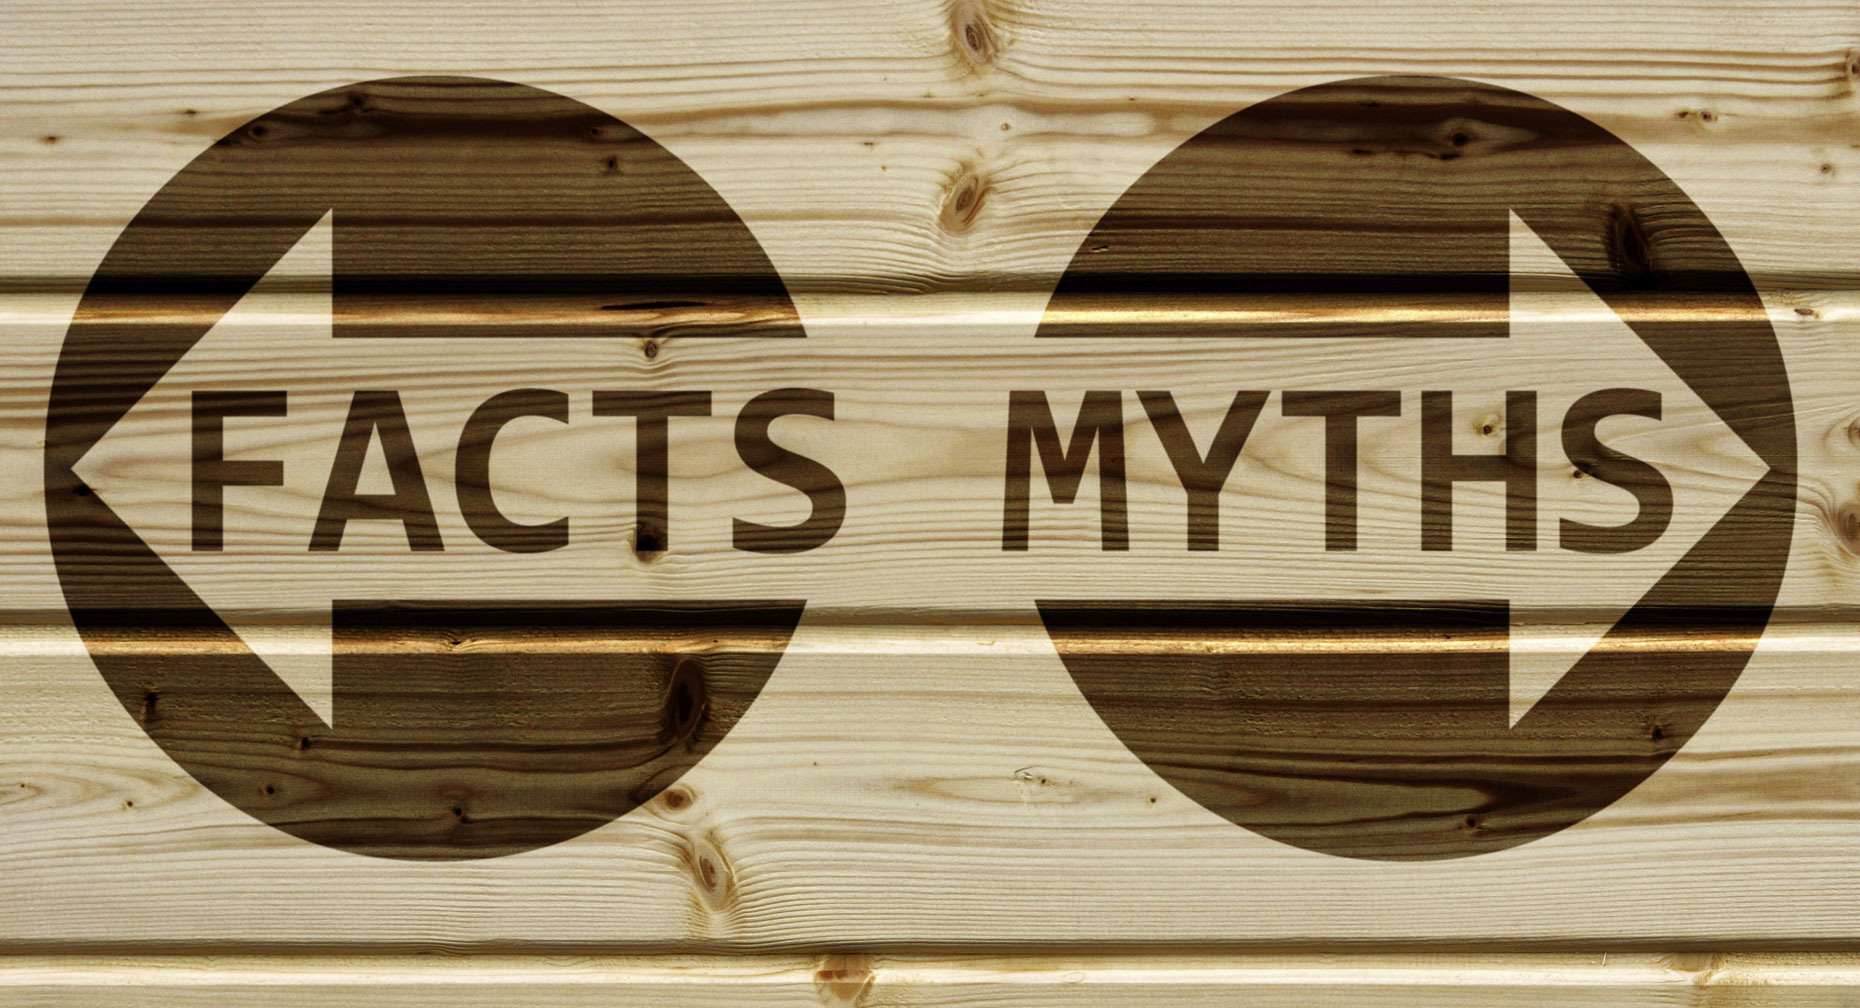 Cancer facts versus myths opposing directional arrows